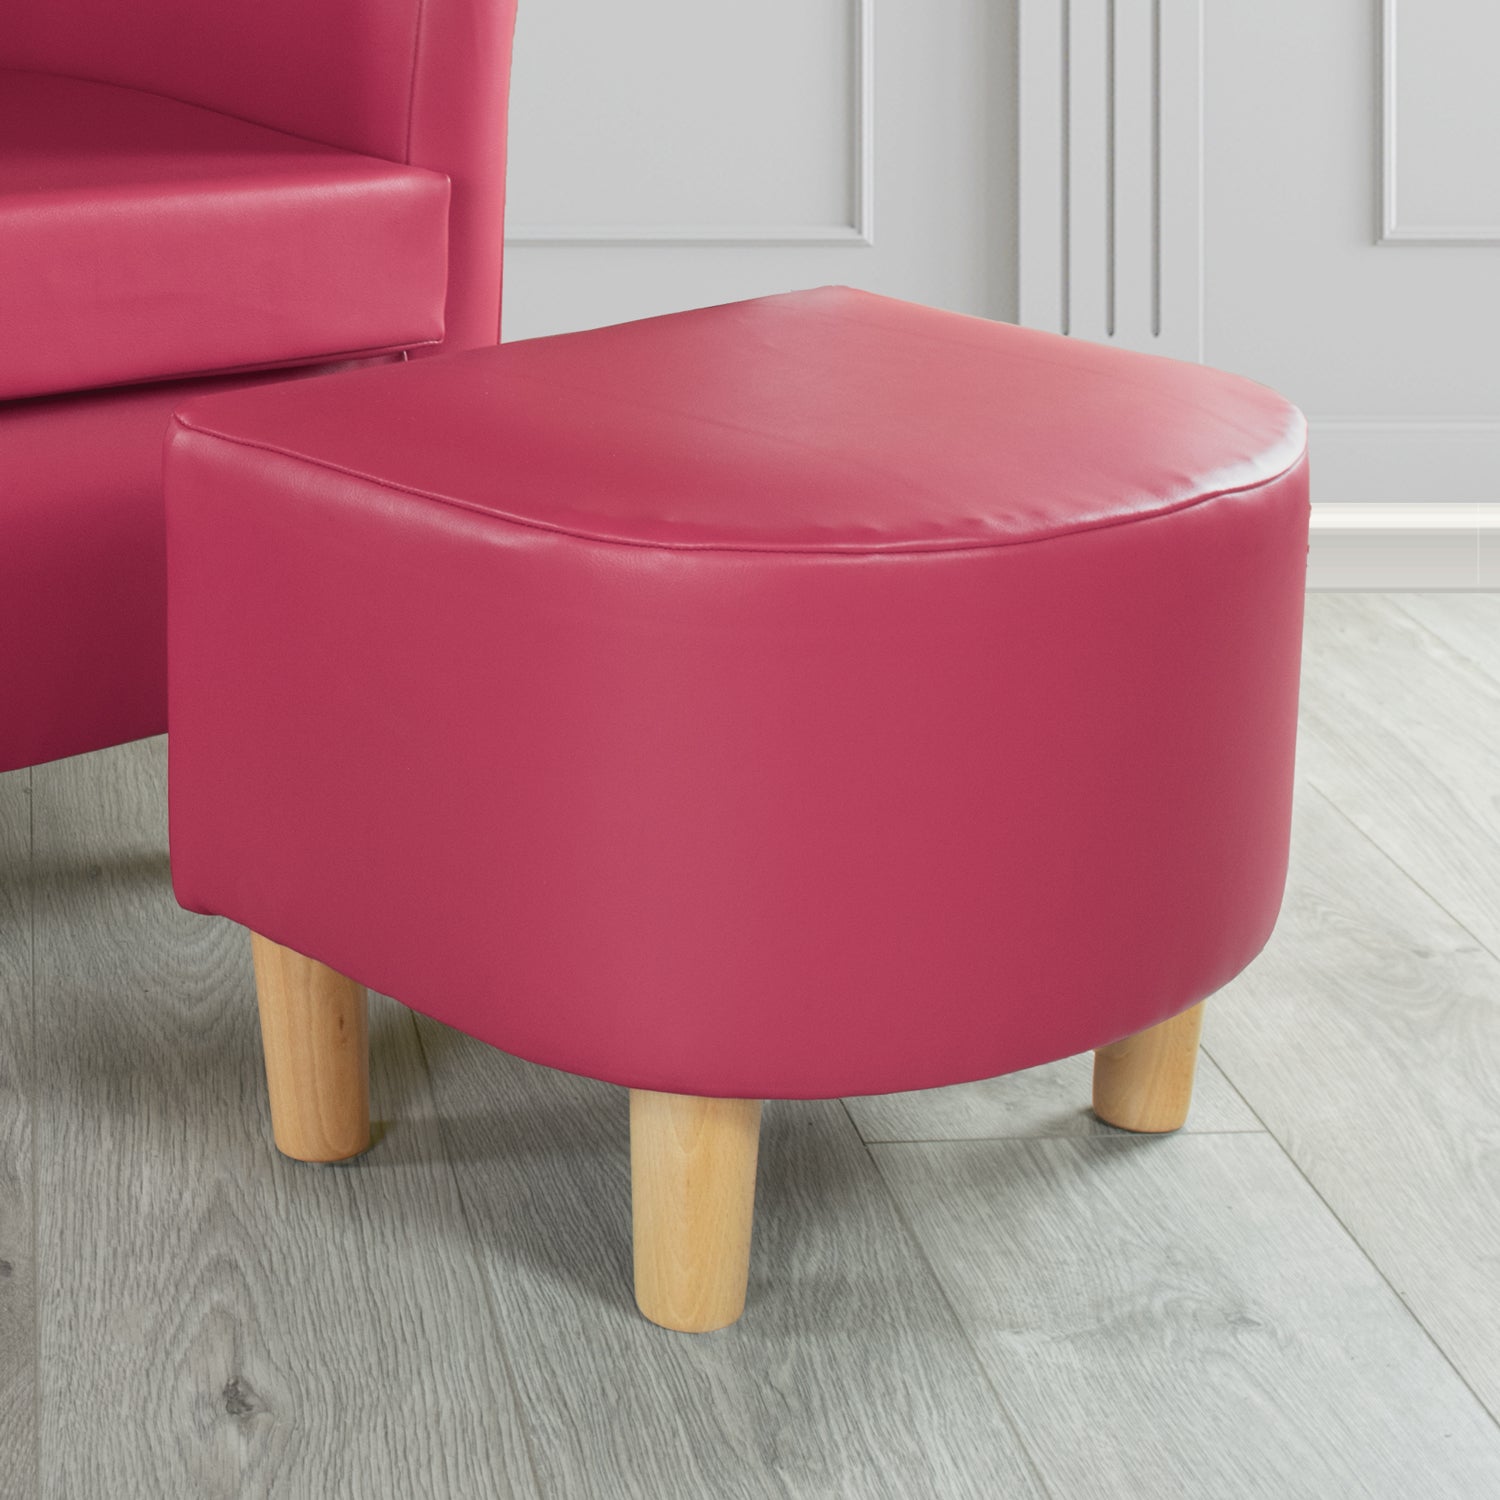 Tuscany Just Colour Deep Rose Faux Leather Footstool (4601149849642)